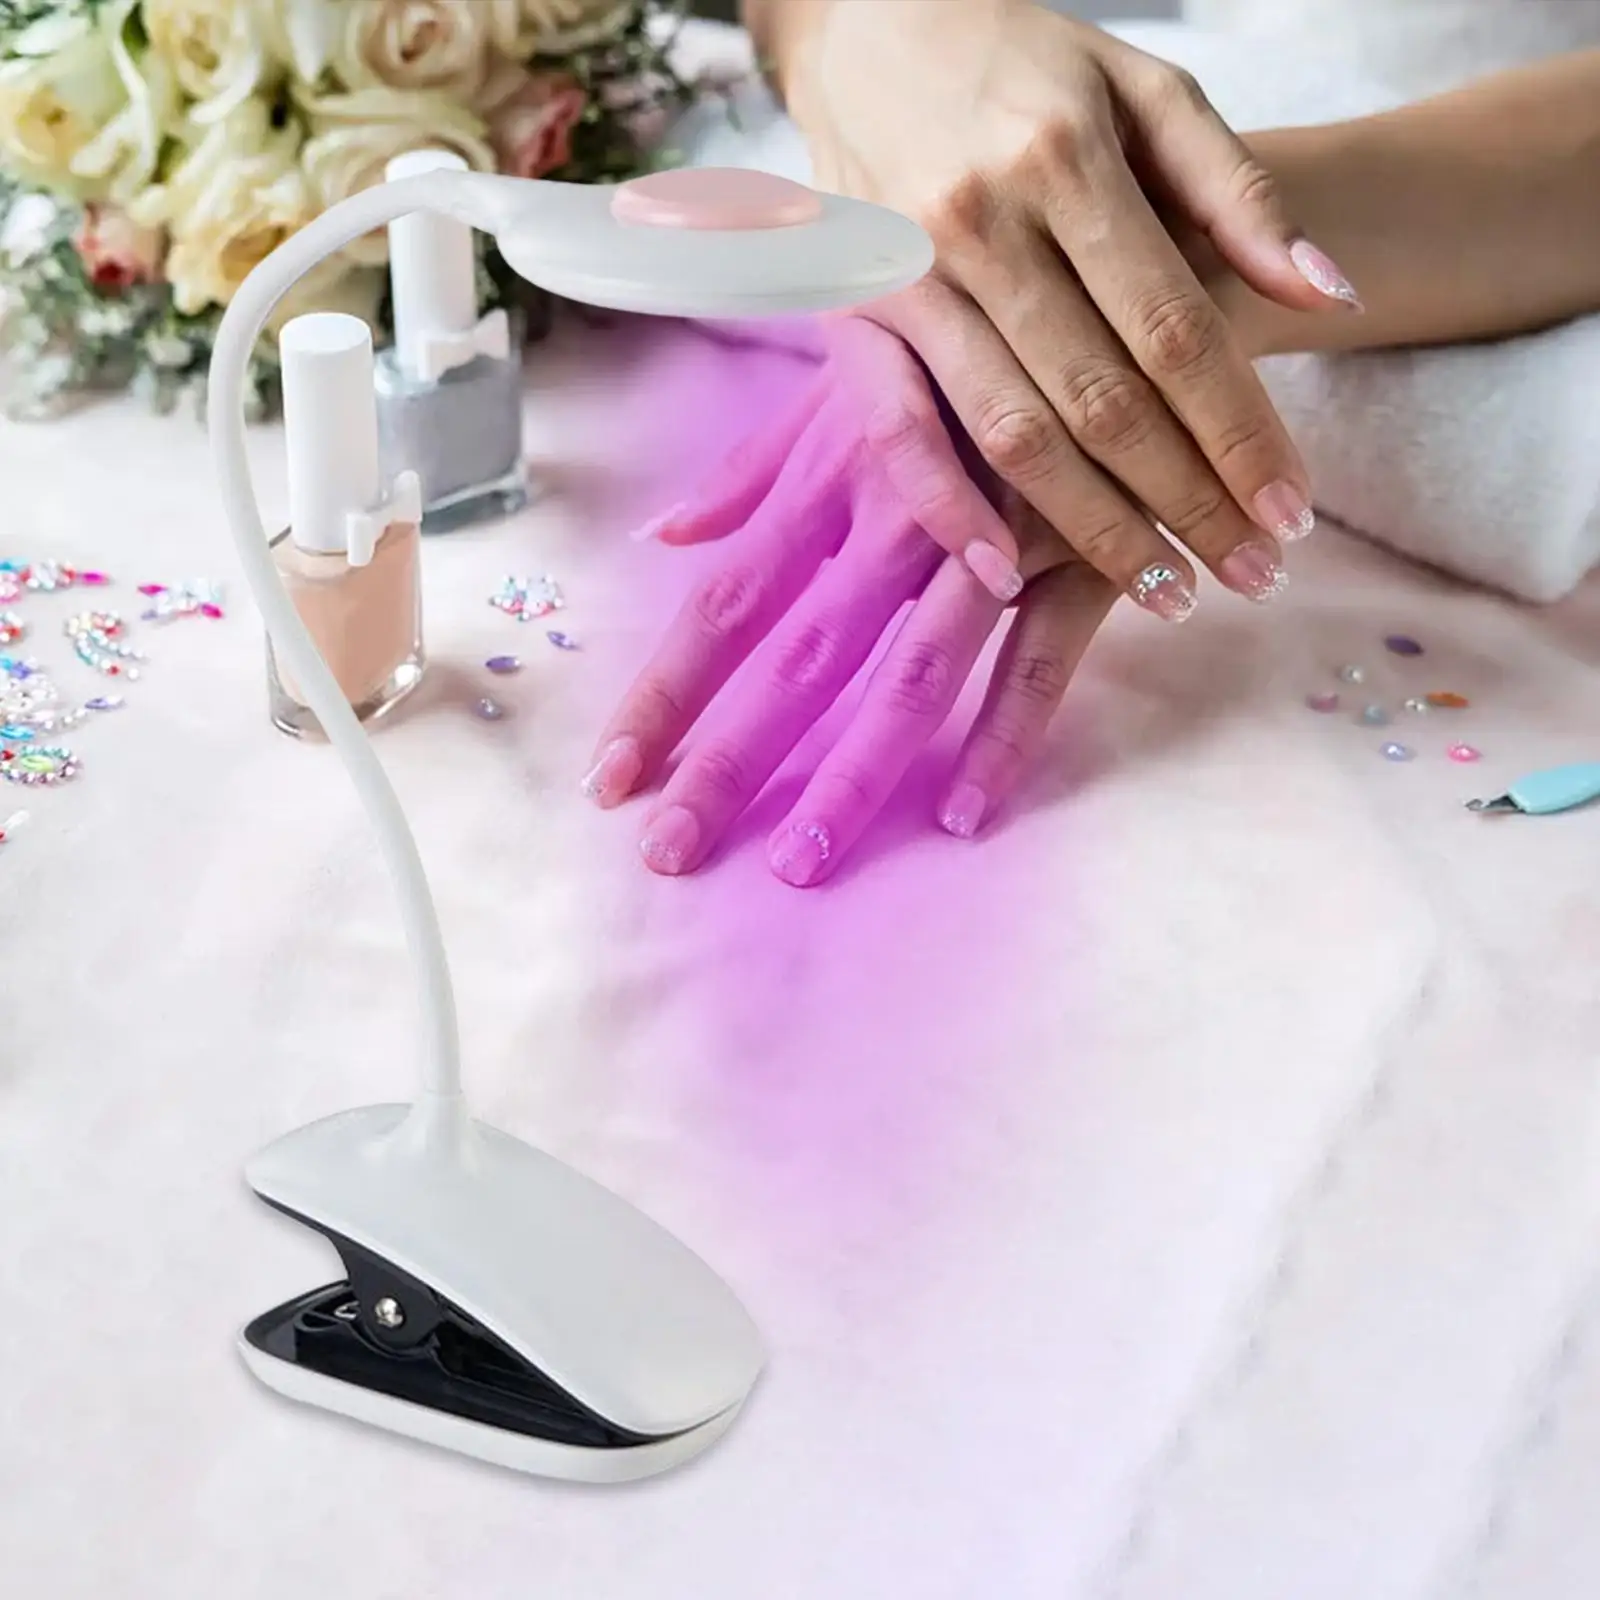 Nail Lamp Quick Dry with Gooseneck and Clamp Small Professional Nail Dryer Nail Polish Curing Lamp for Ultraviolet Curing